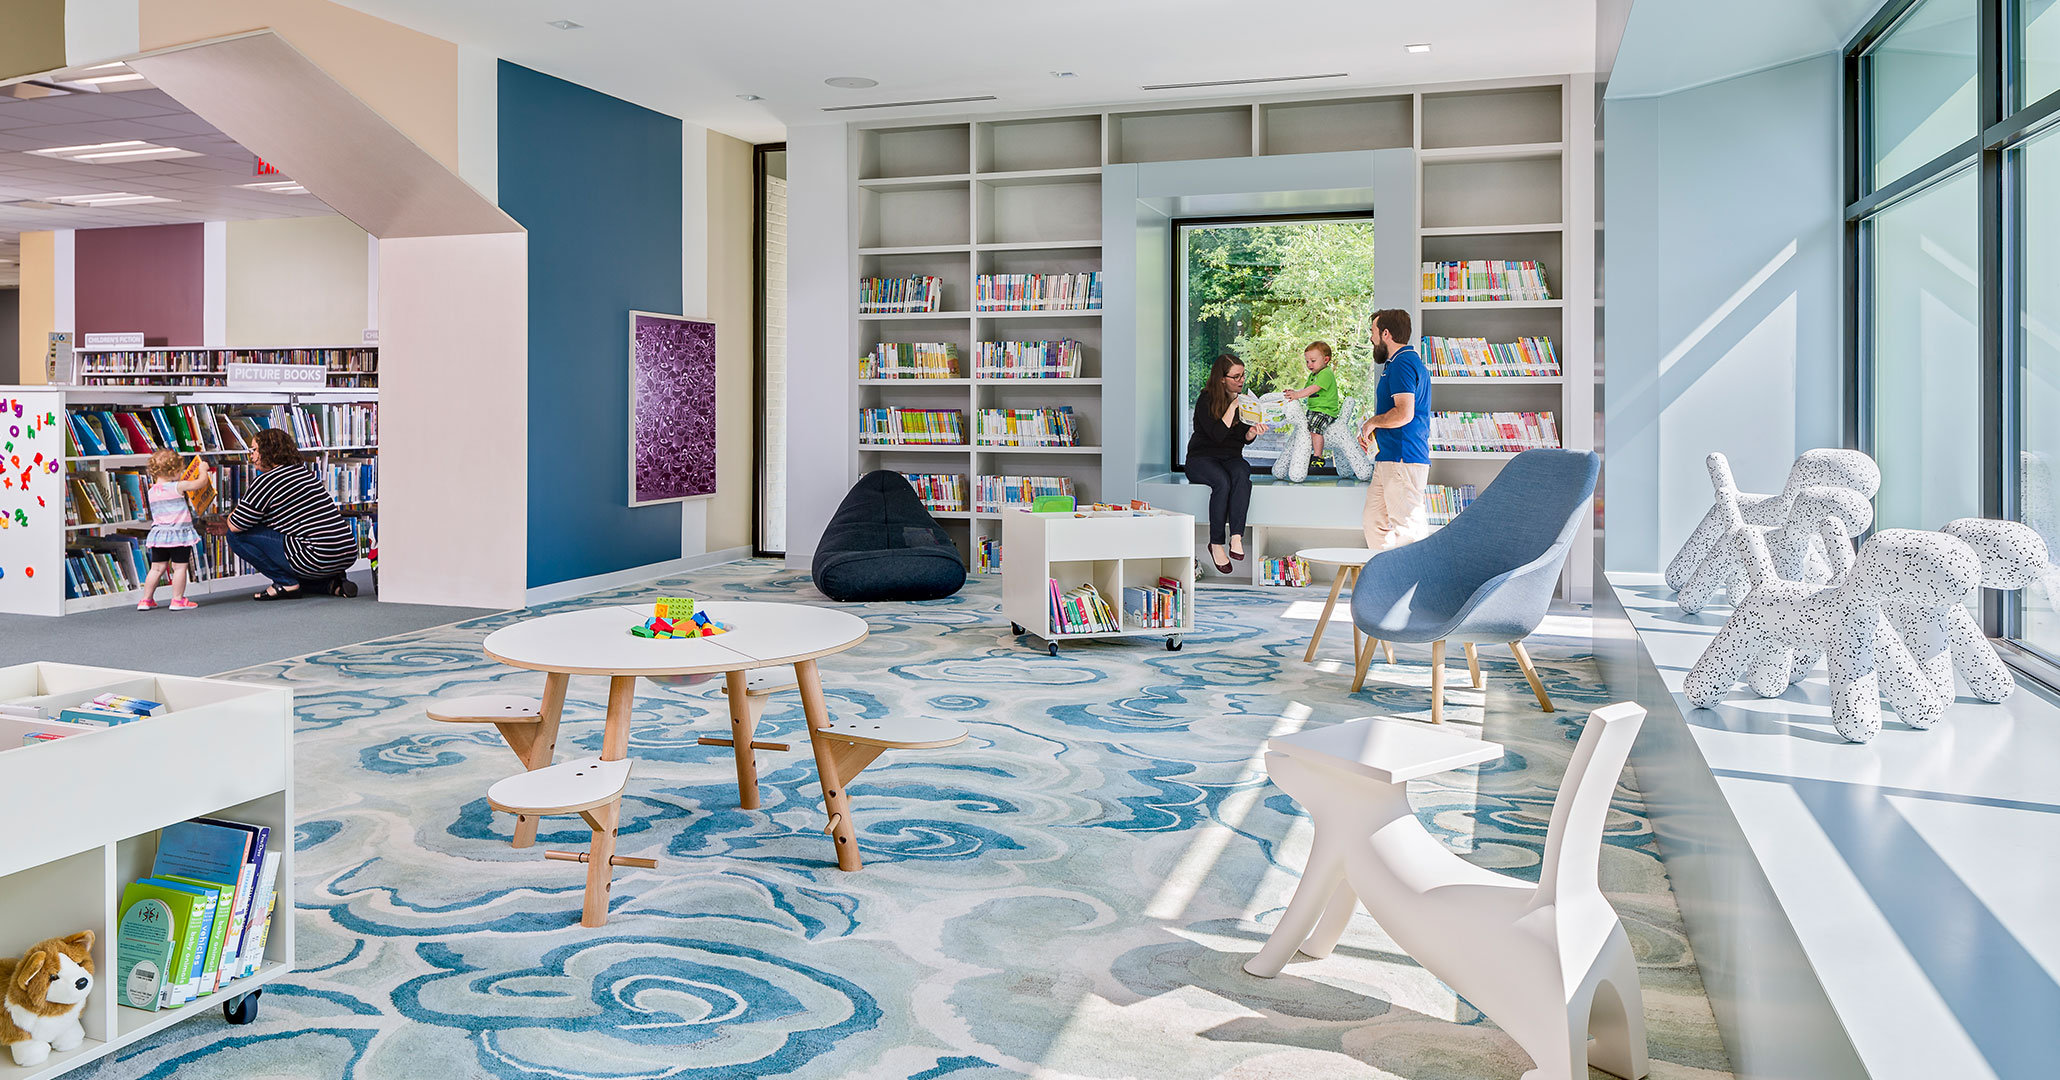 Boudreaux architects out of Columbia, SC designed colorful spaces for the Cooper library.